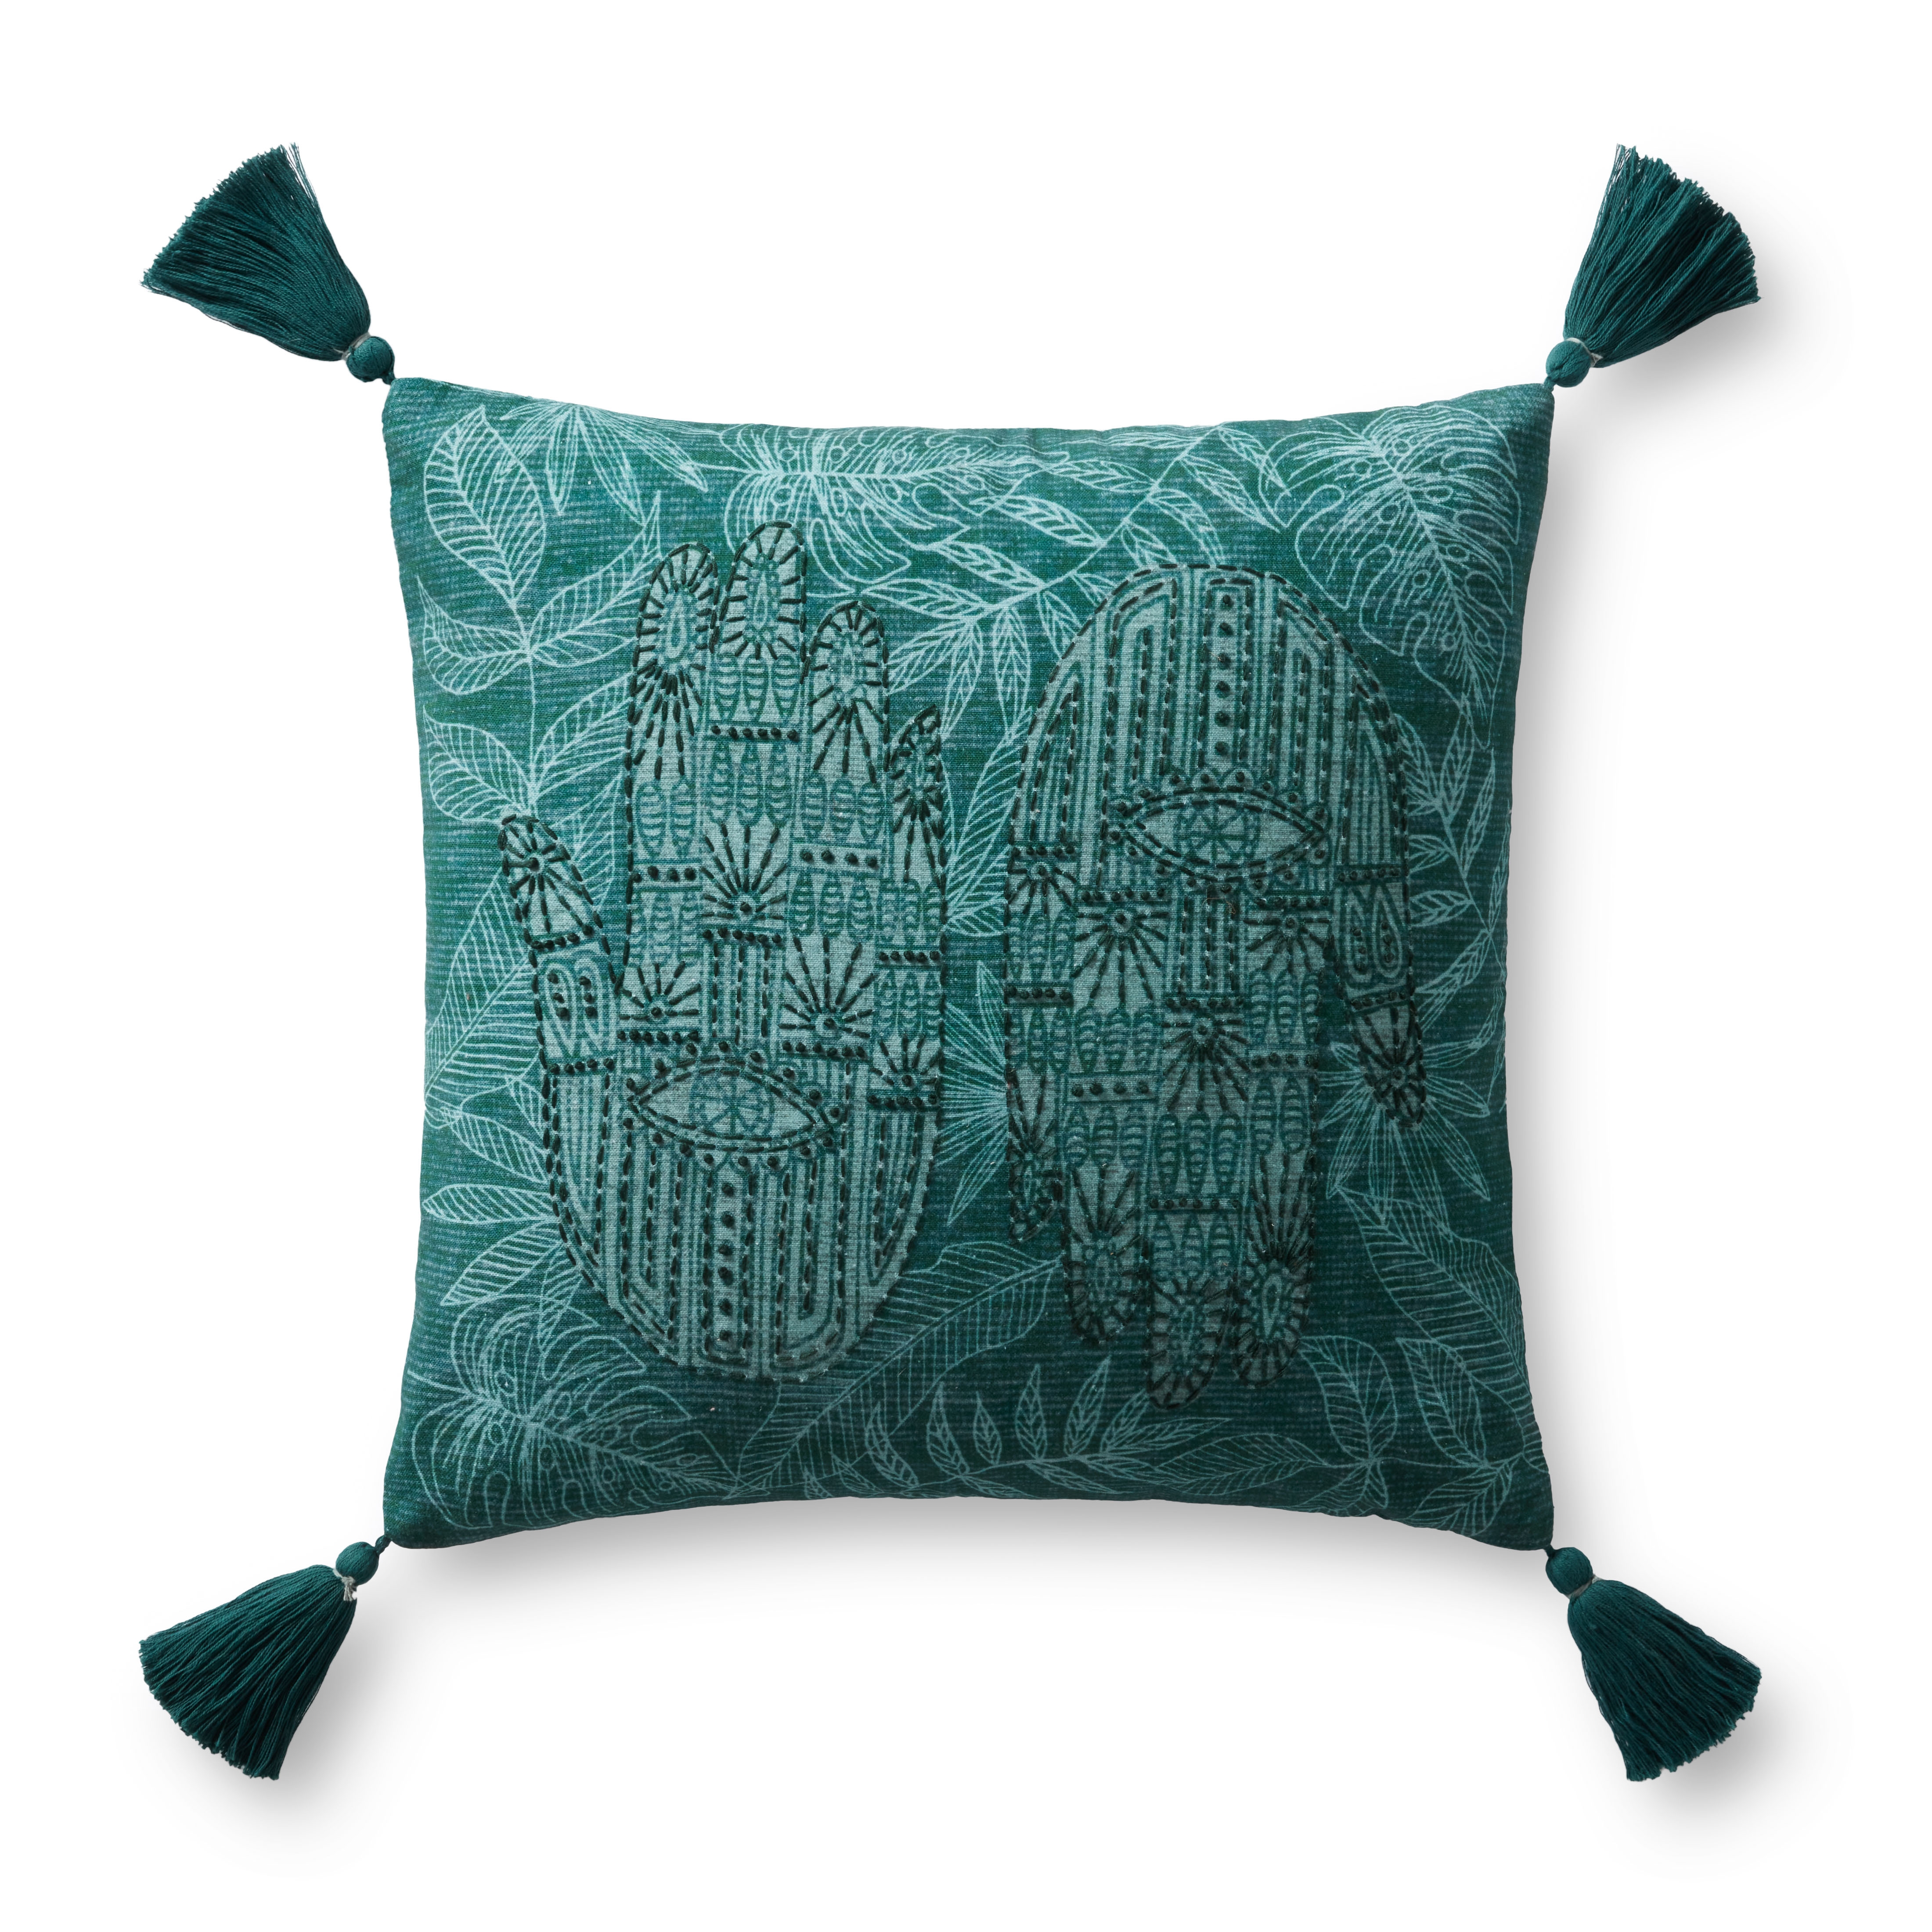 Justina Blakeney x Loloi Pillows P0956 Green 18" x 18" Cover Only - Image 0